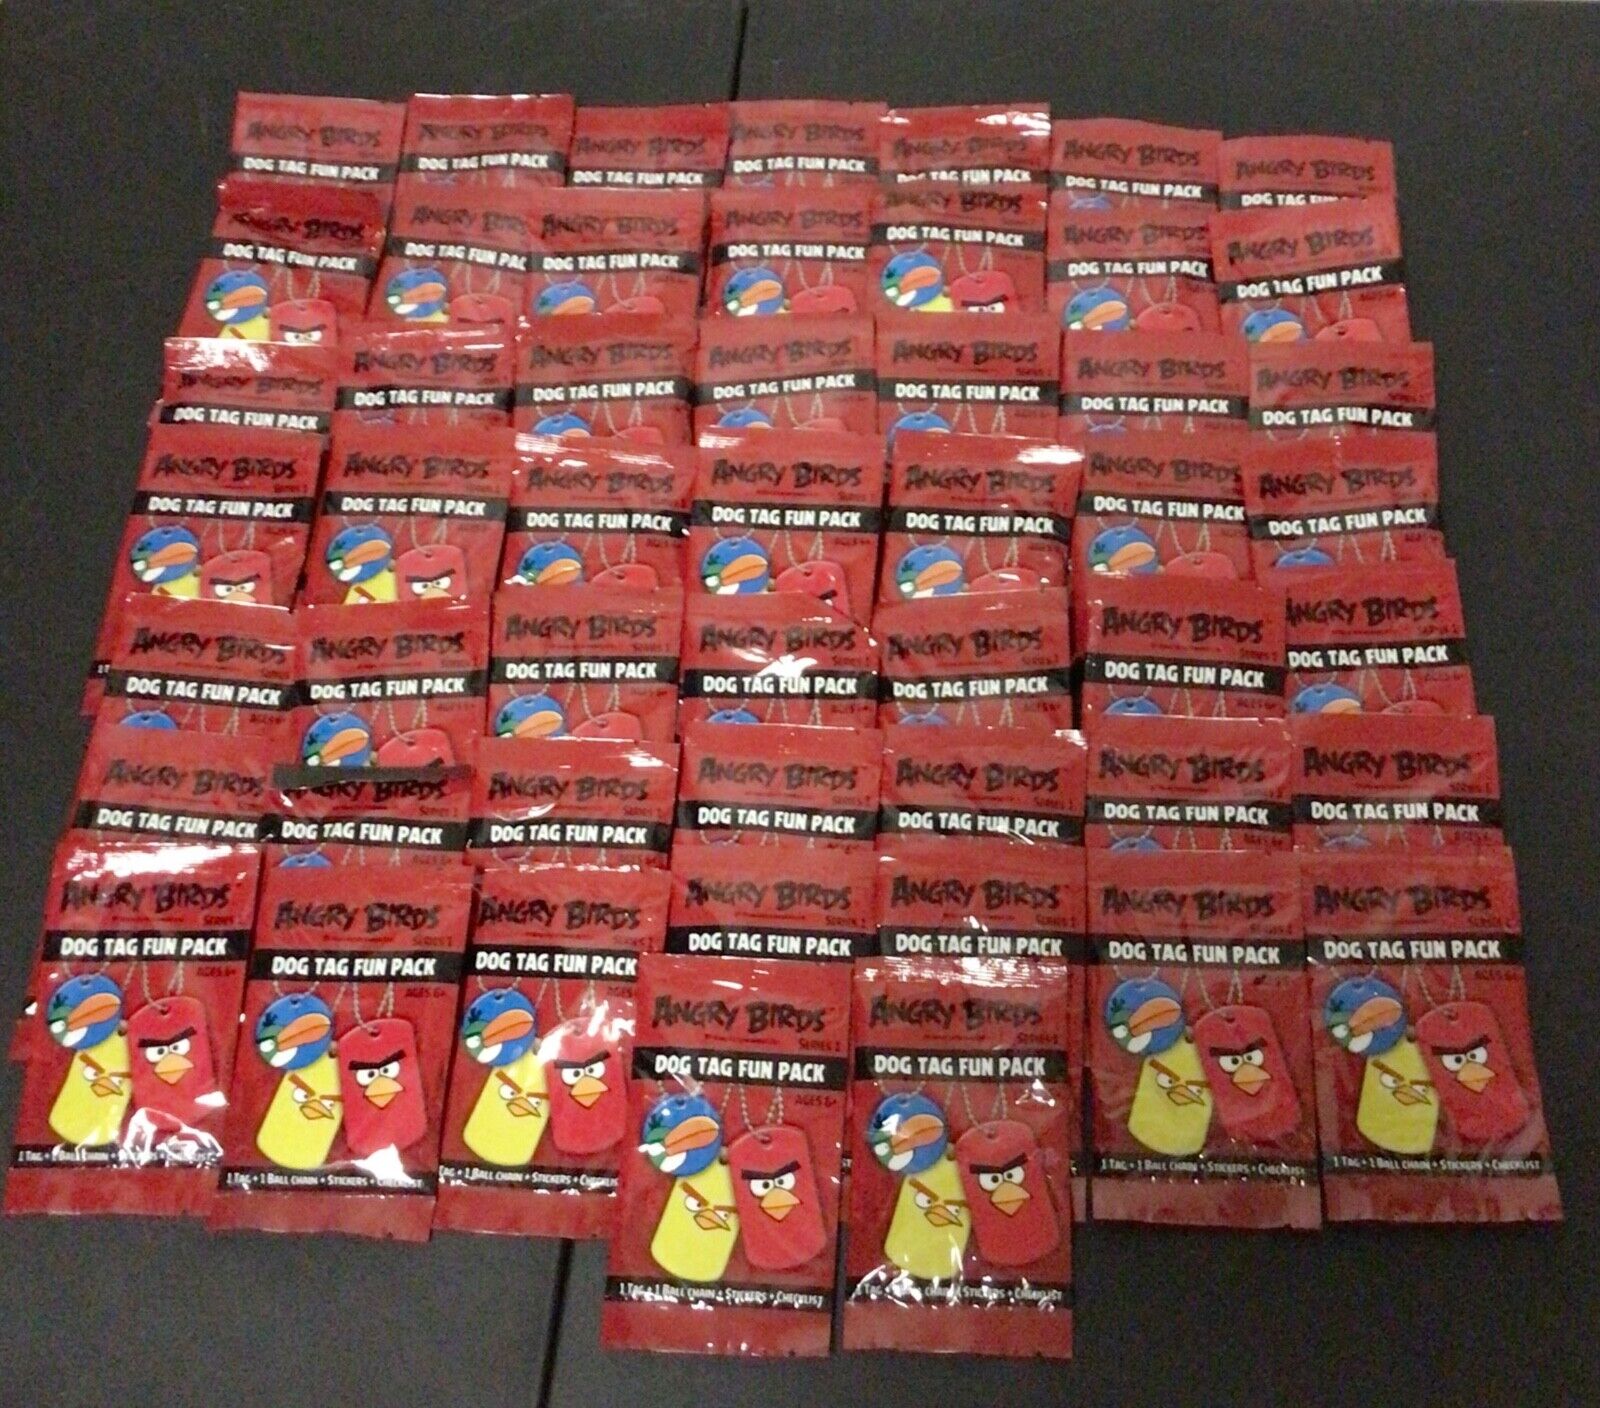 2012 Angry Birds Series 1 Dog Tag Fun Pack Lot of 50 New & Sealed